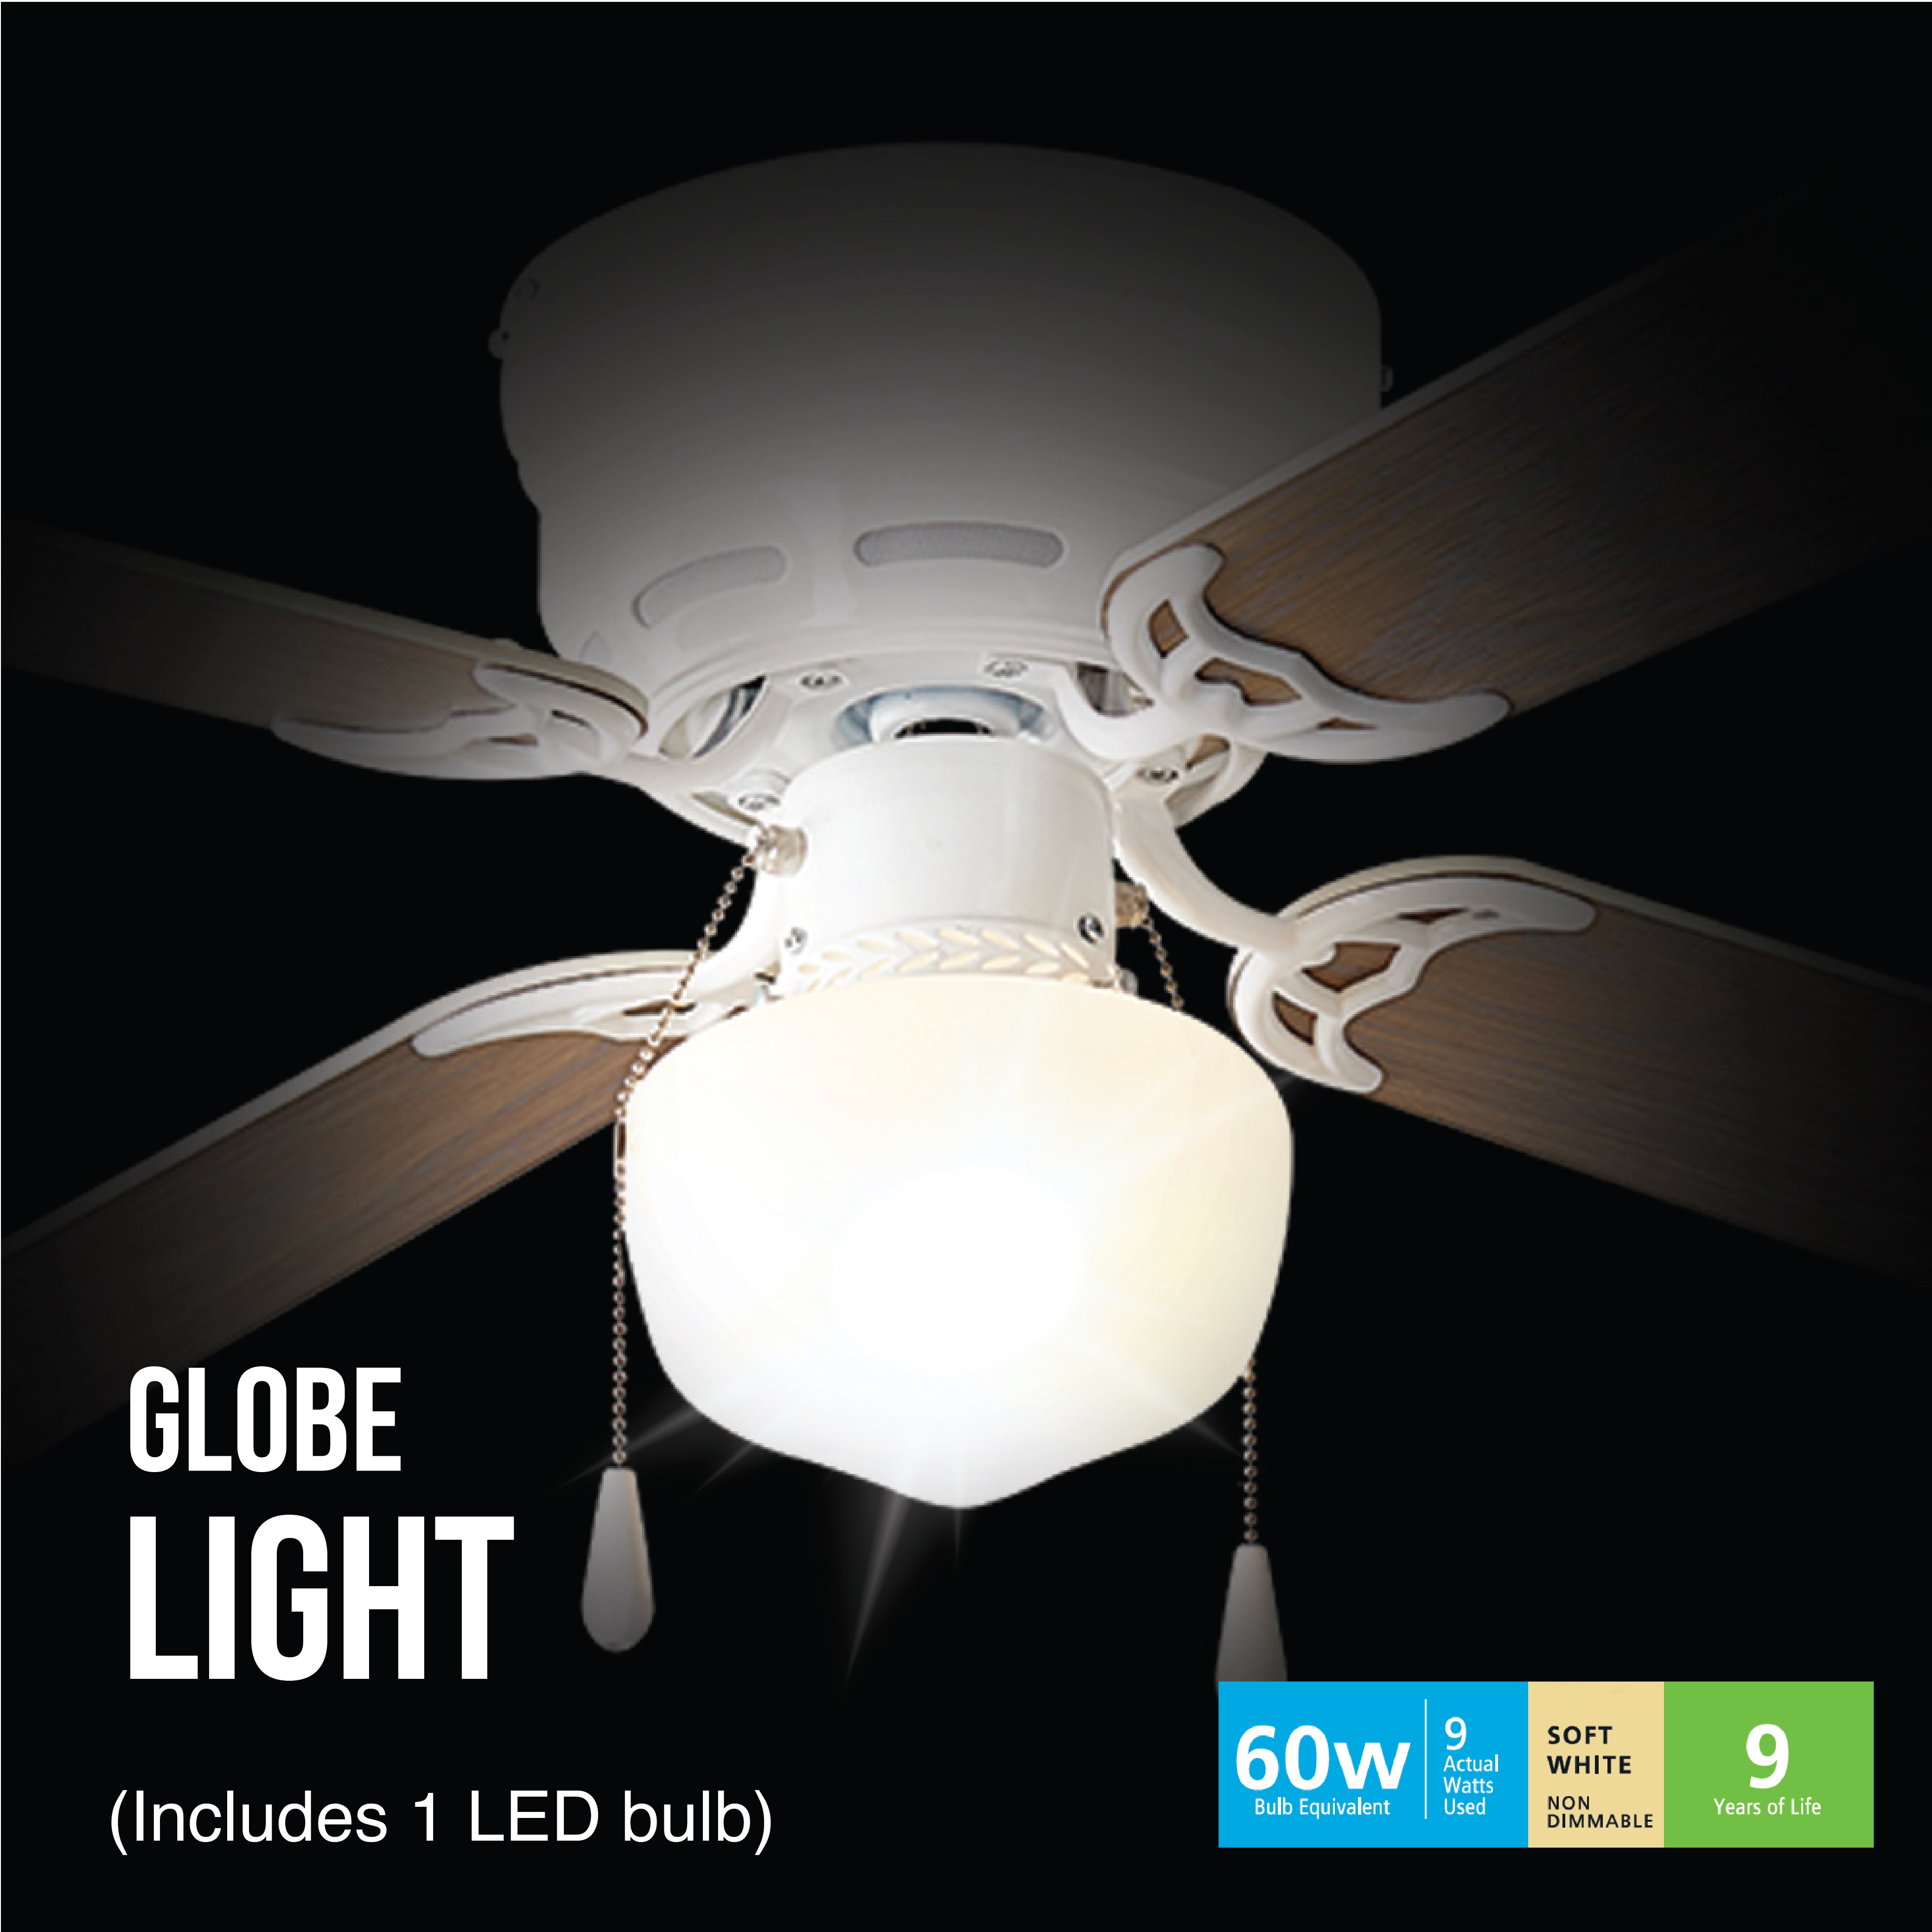 Mainstays 42 Inch Hugger Metal Indoor Ceiling Fan with Light, White, 4 Blades, LED Bulb, Reverse Airflow - image 5 of 17